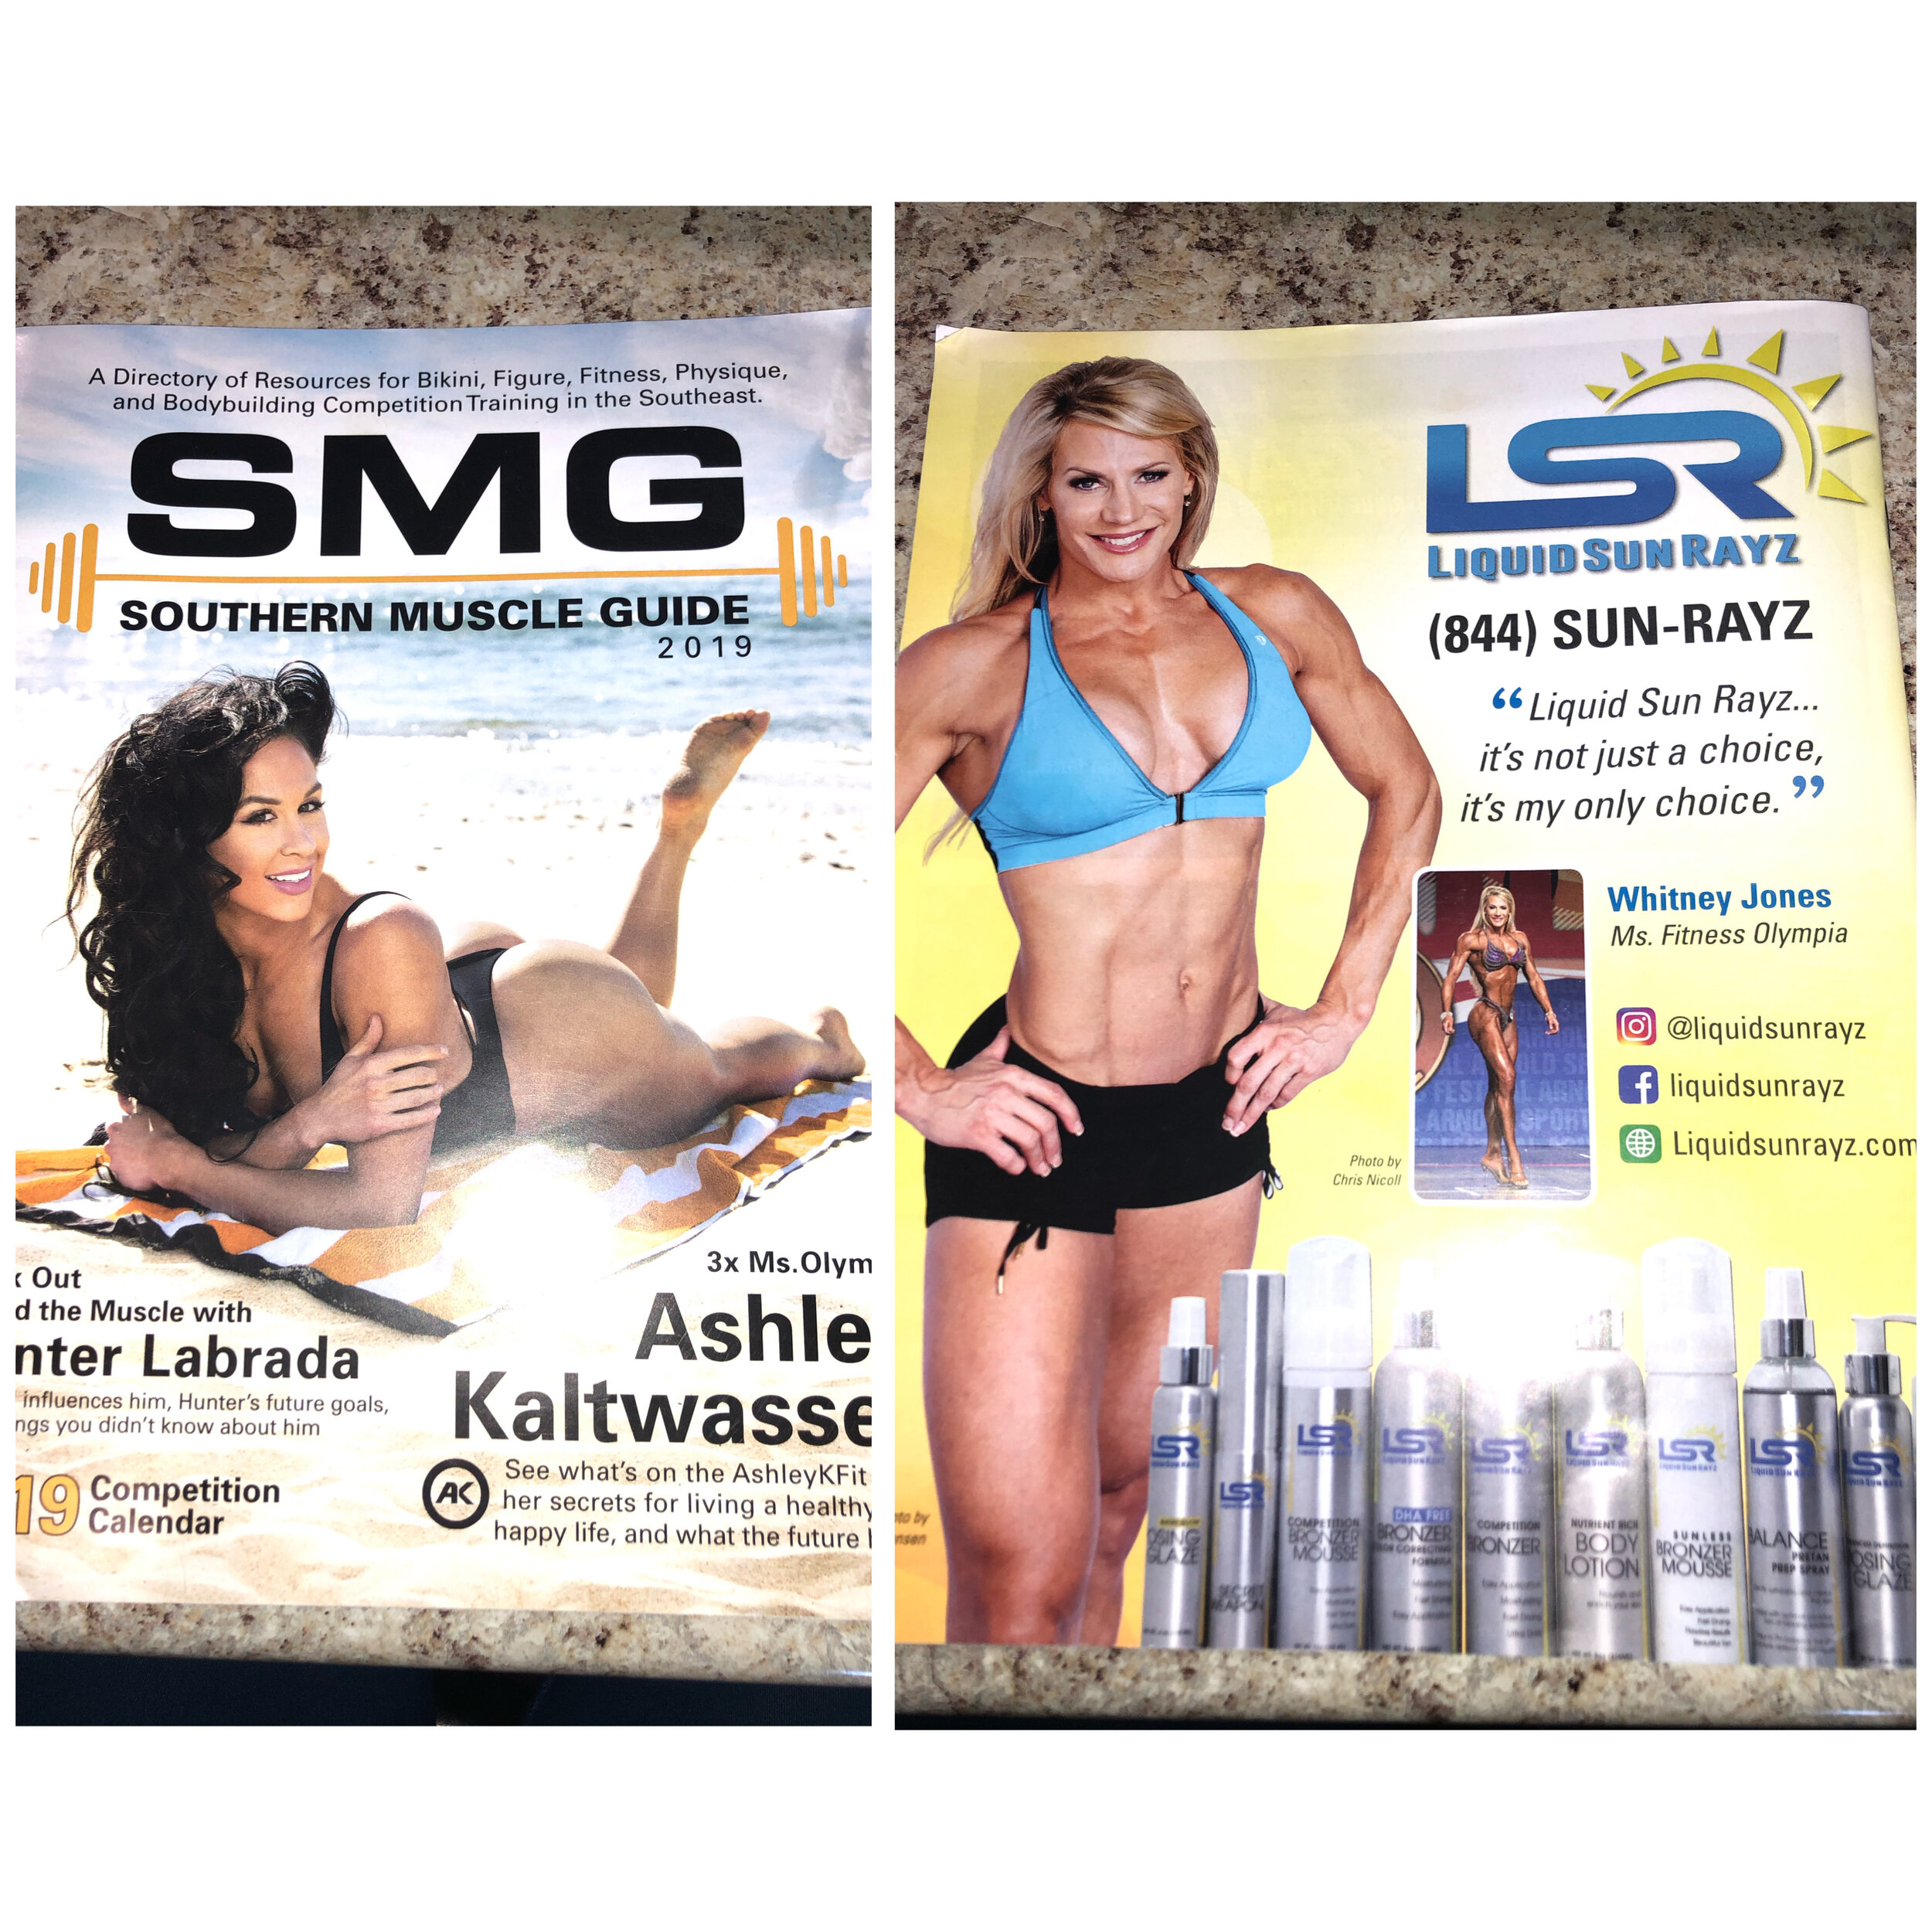 Southern Muscle Guide / 2019